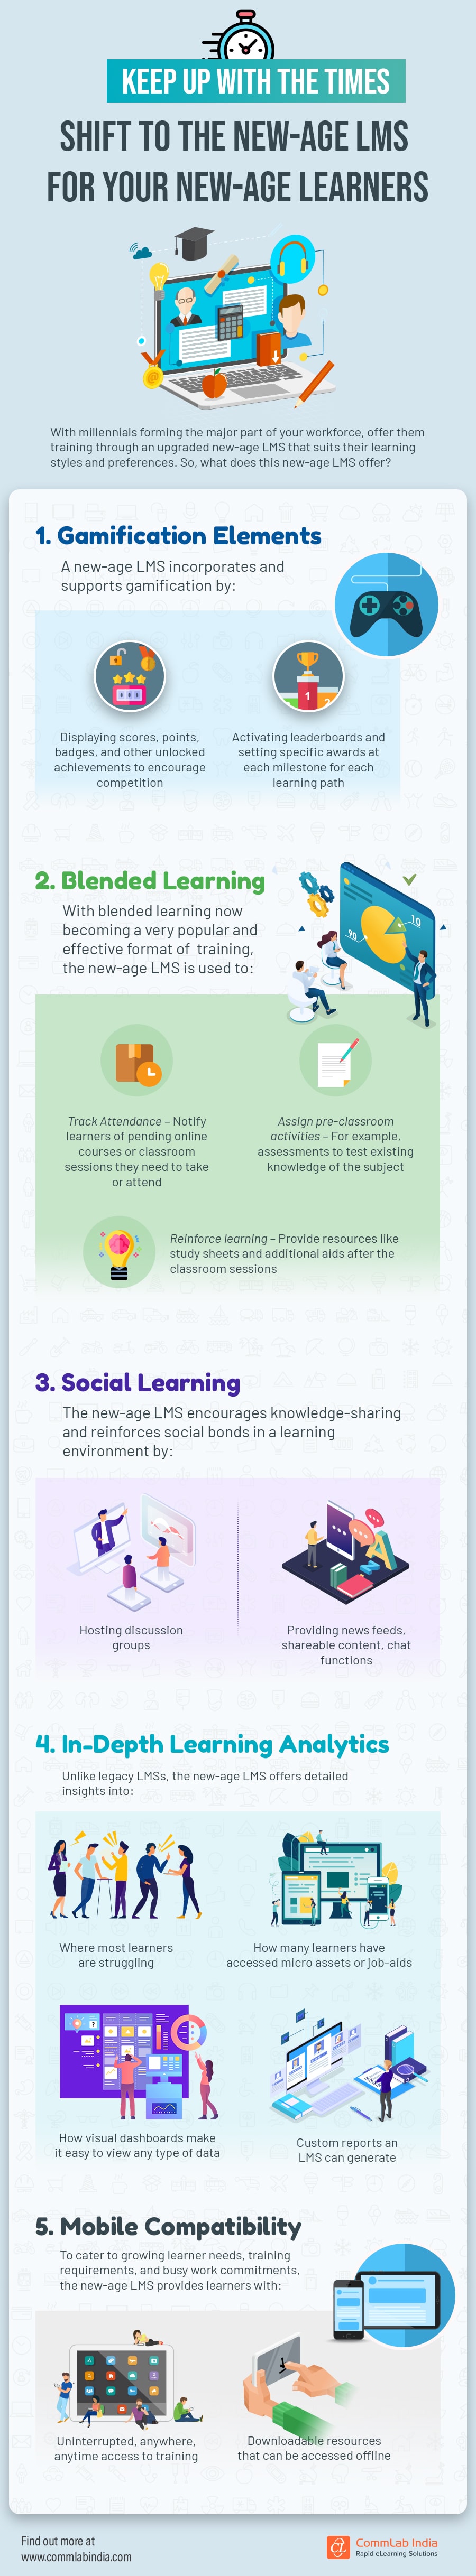 LMS for New-Age Learners – What Should You Look for?